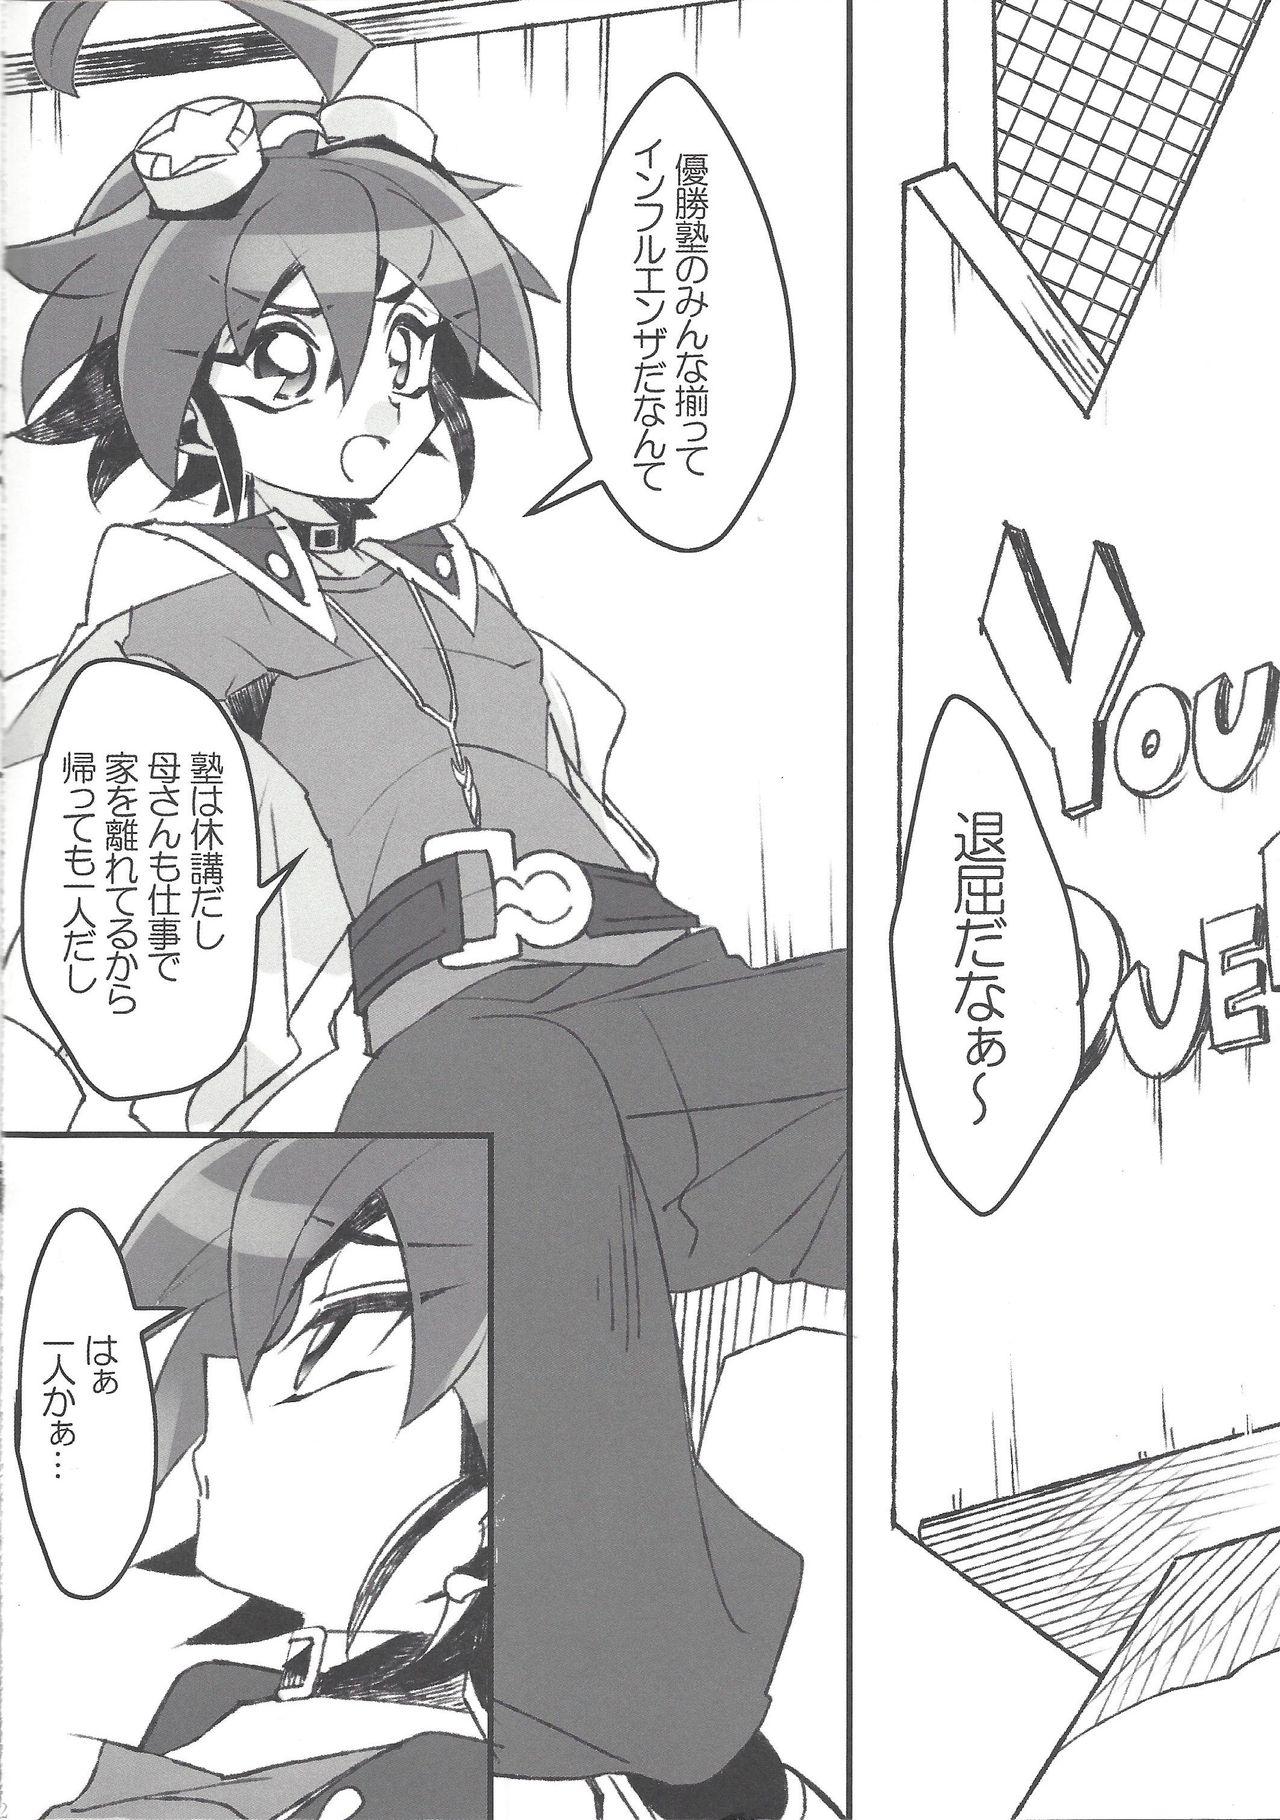 Gay Money HAPPINESS TIME! - Yu-gi-oh arc-v Super Hot Porn - Page 3